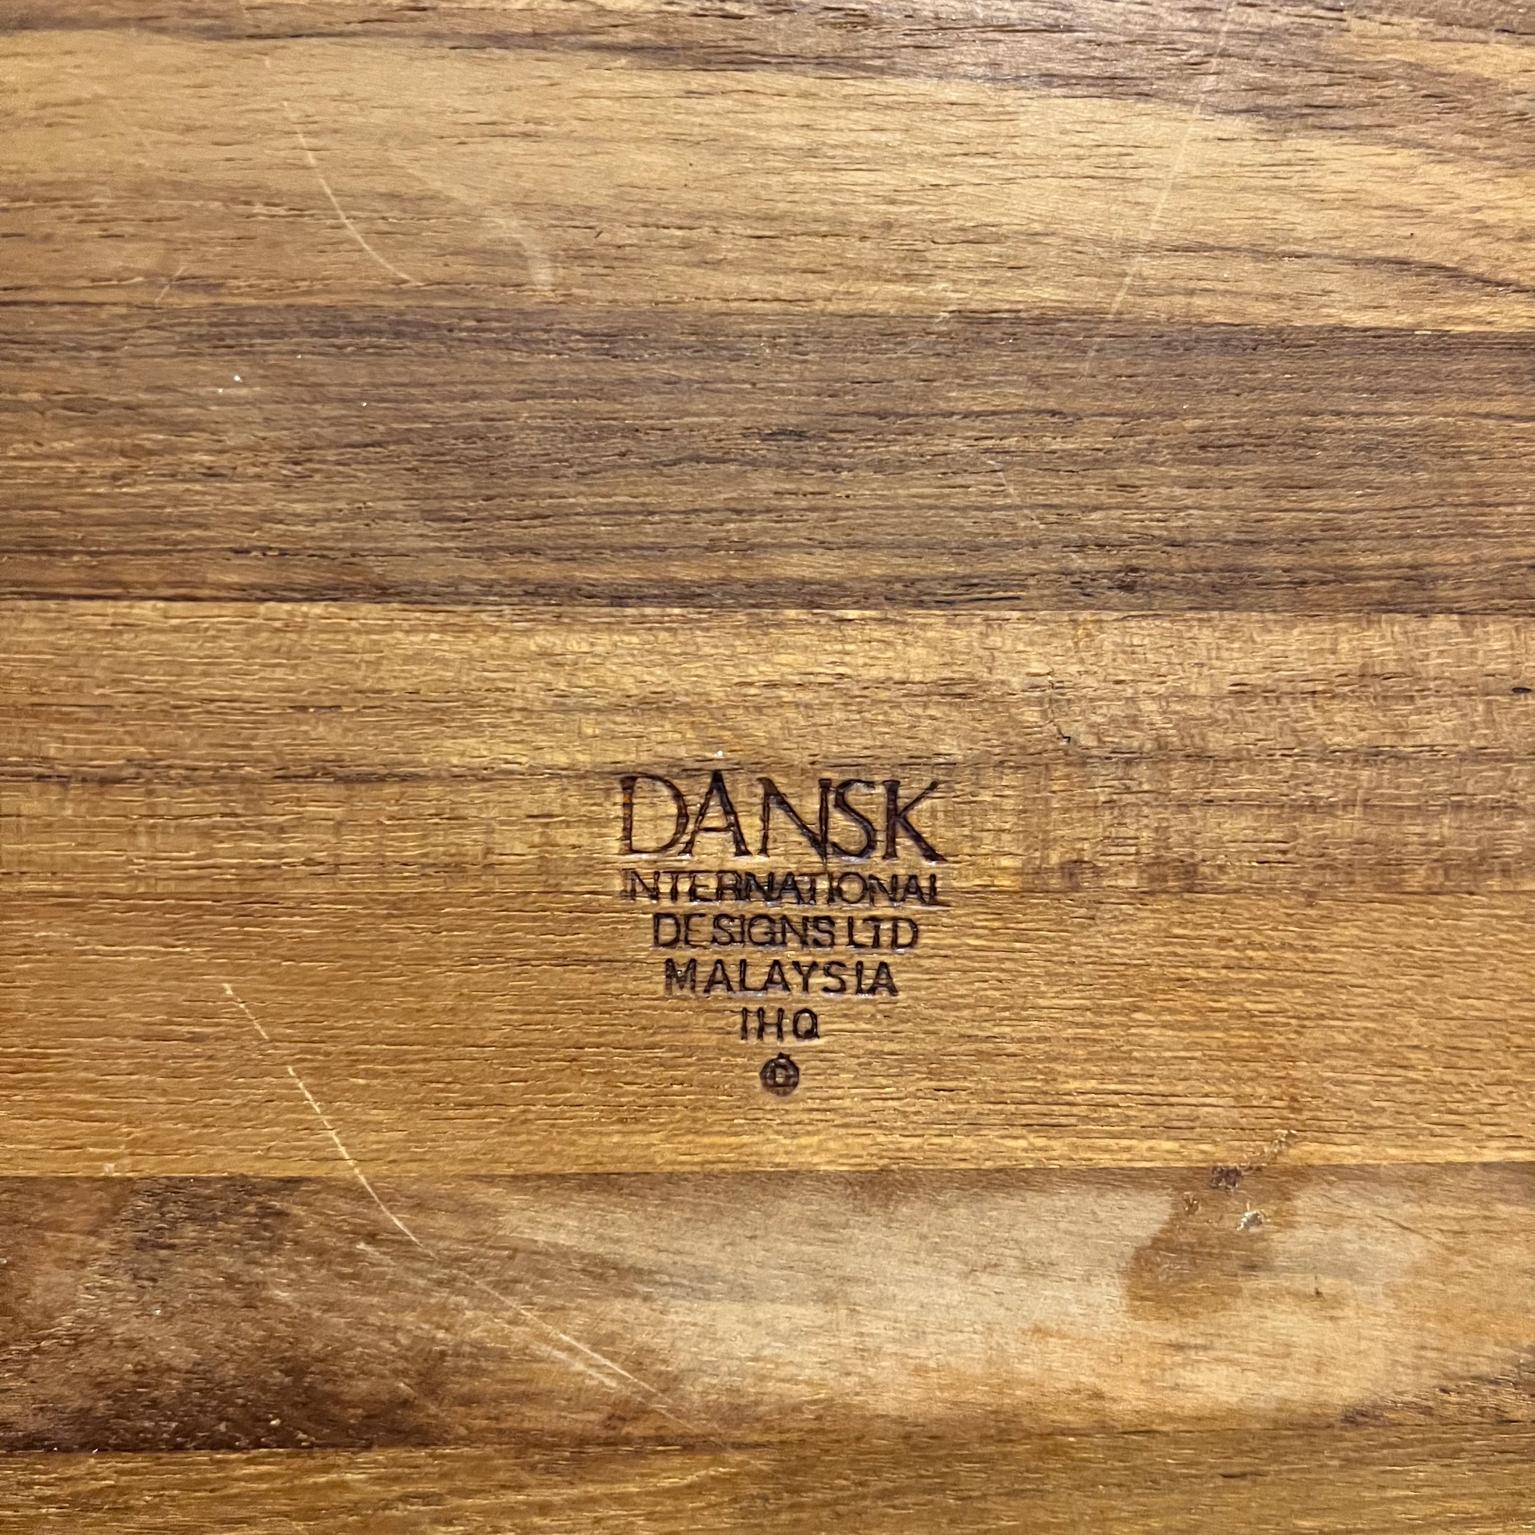 1960s Dansk International Partitioned Teak Snack Tray Malaysia For Sale 1